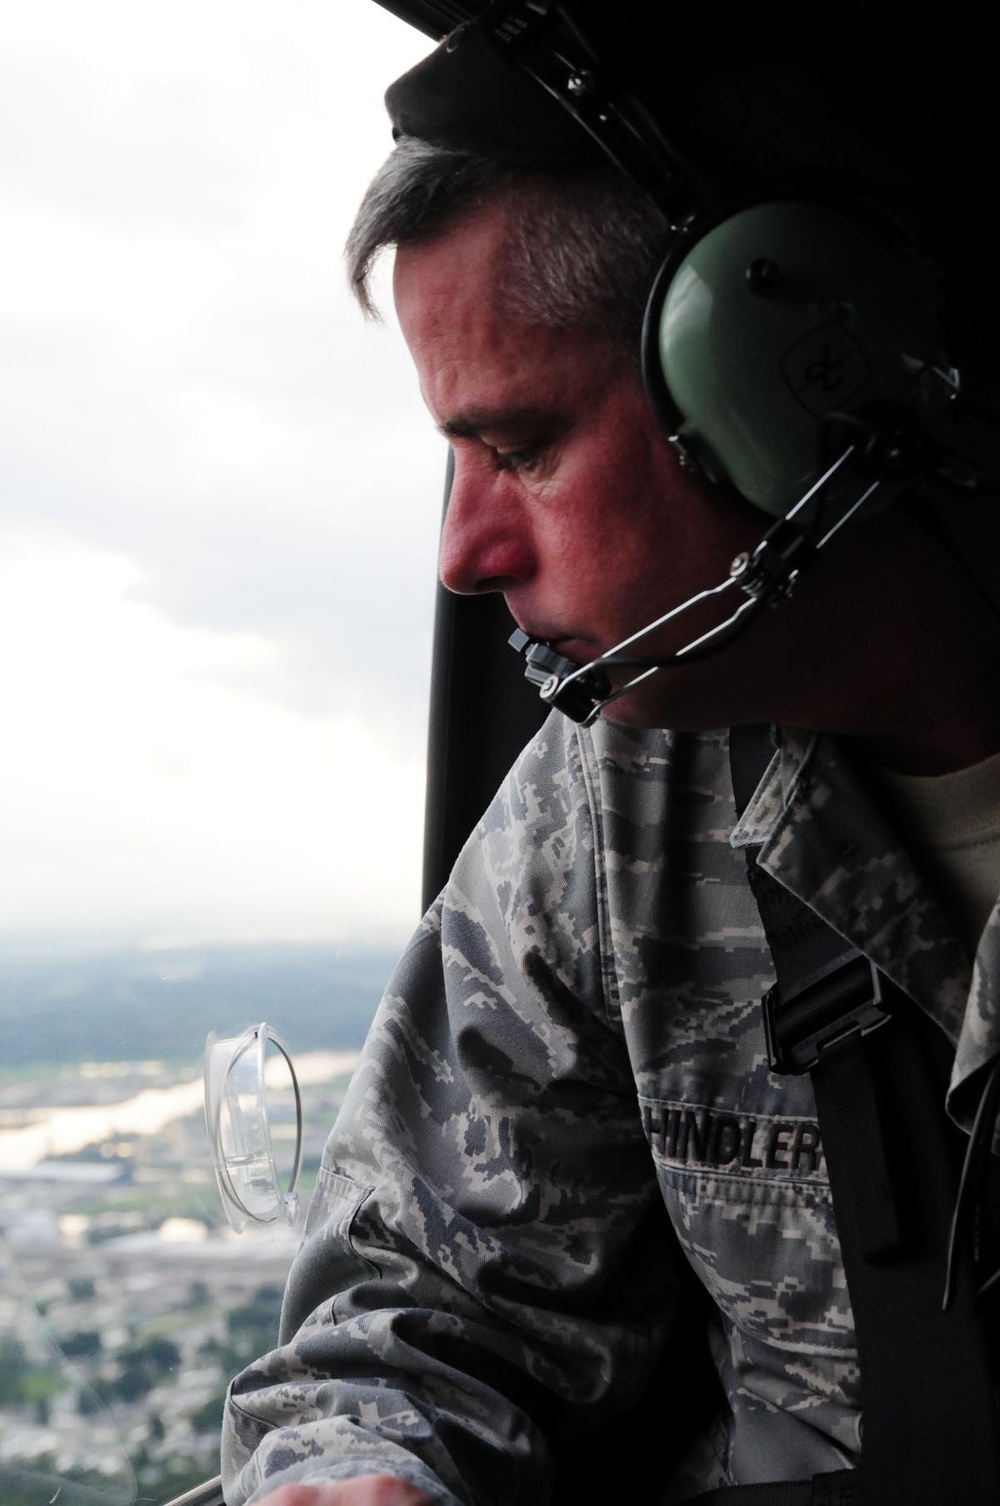 Eyes in the Sky: Louisiana National Guard provides top cover for law enforcement